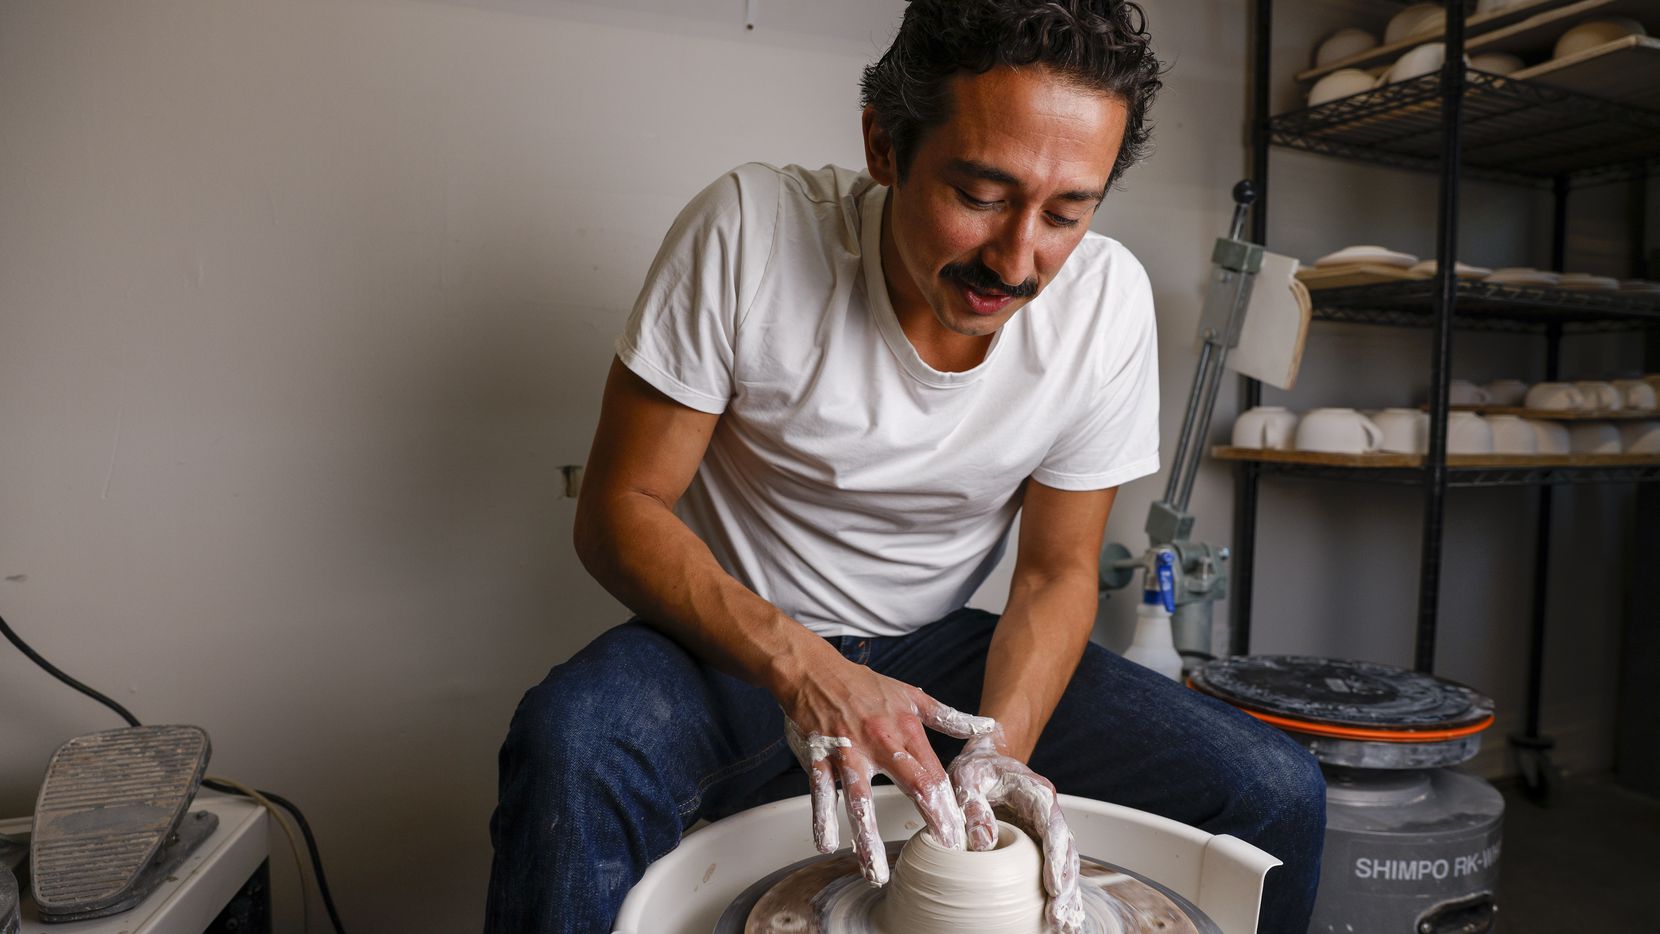 Ceramic artist Marcello Andres works with clay at his studio in Dallas.